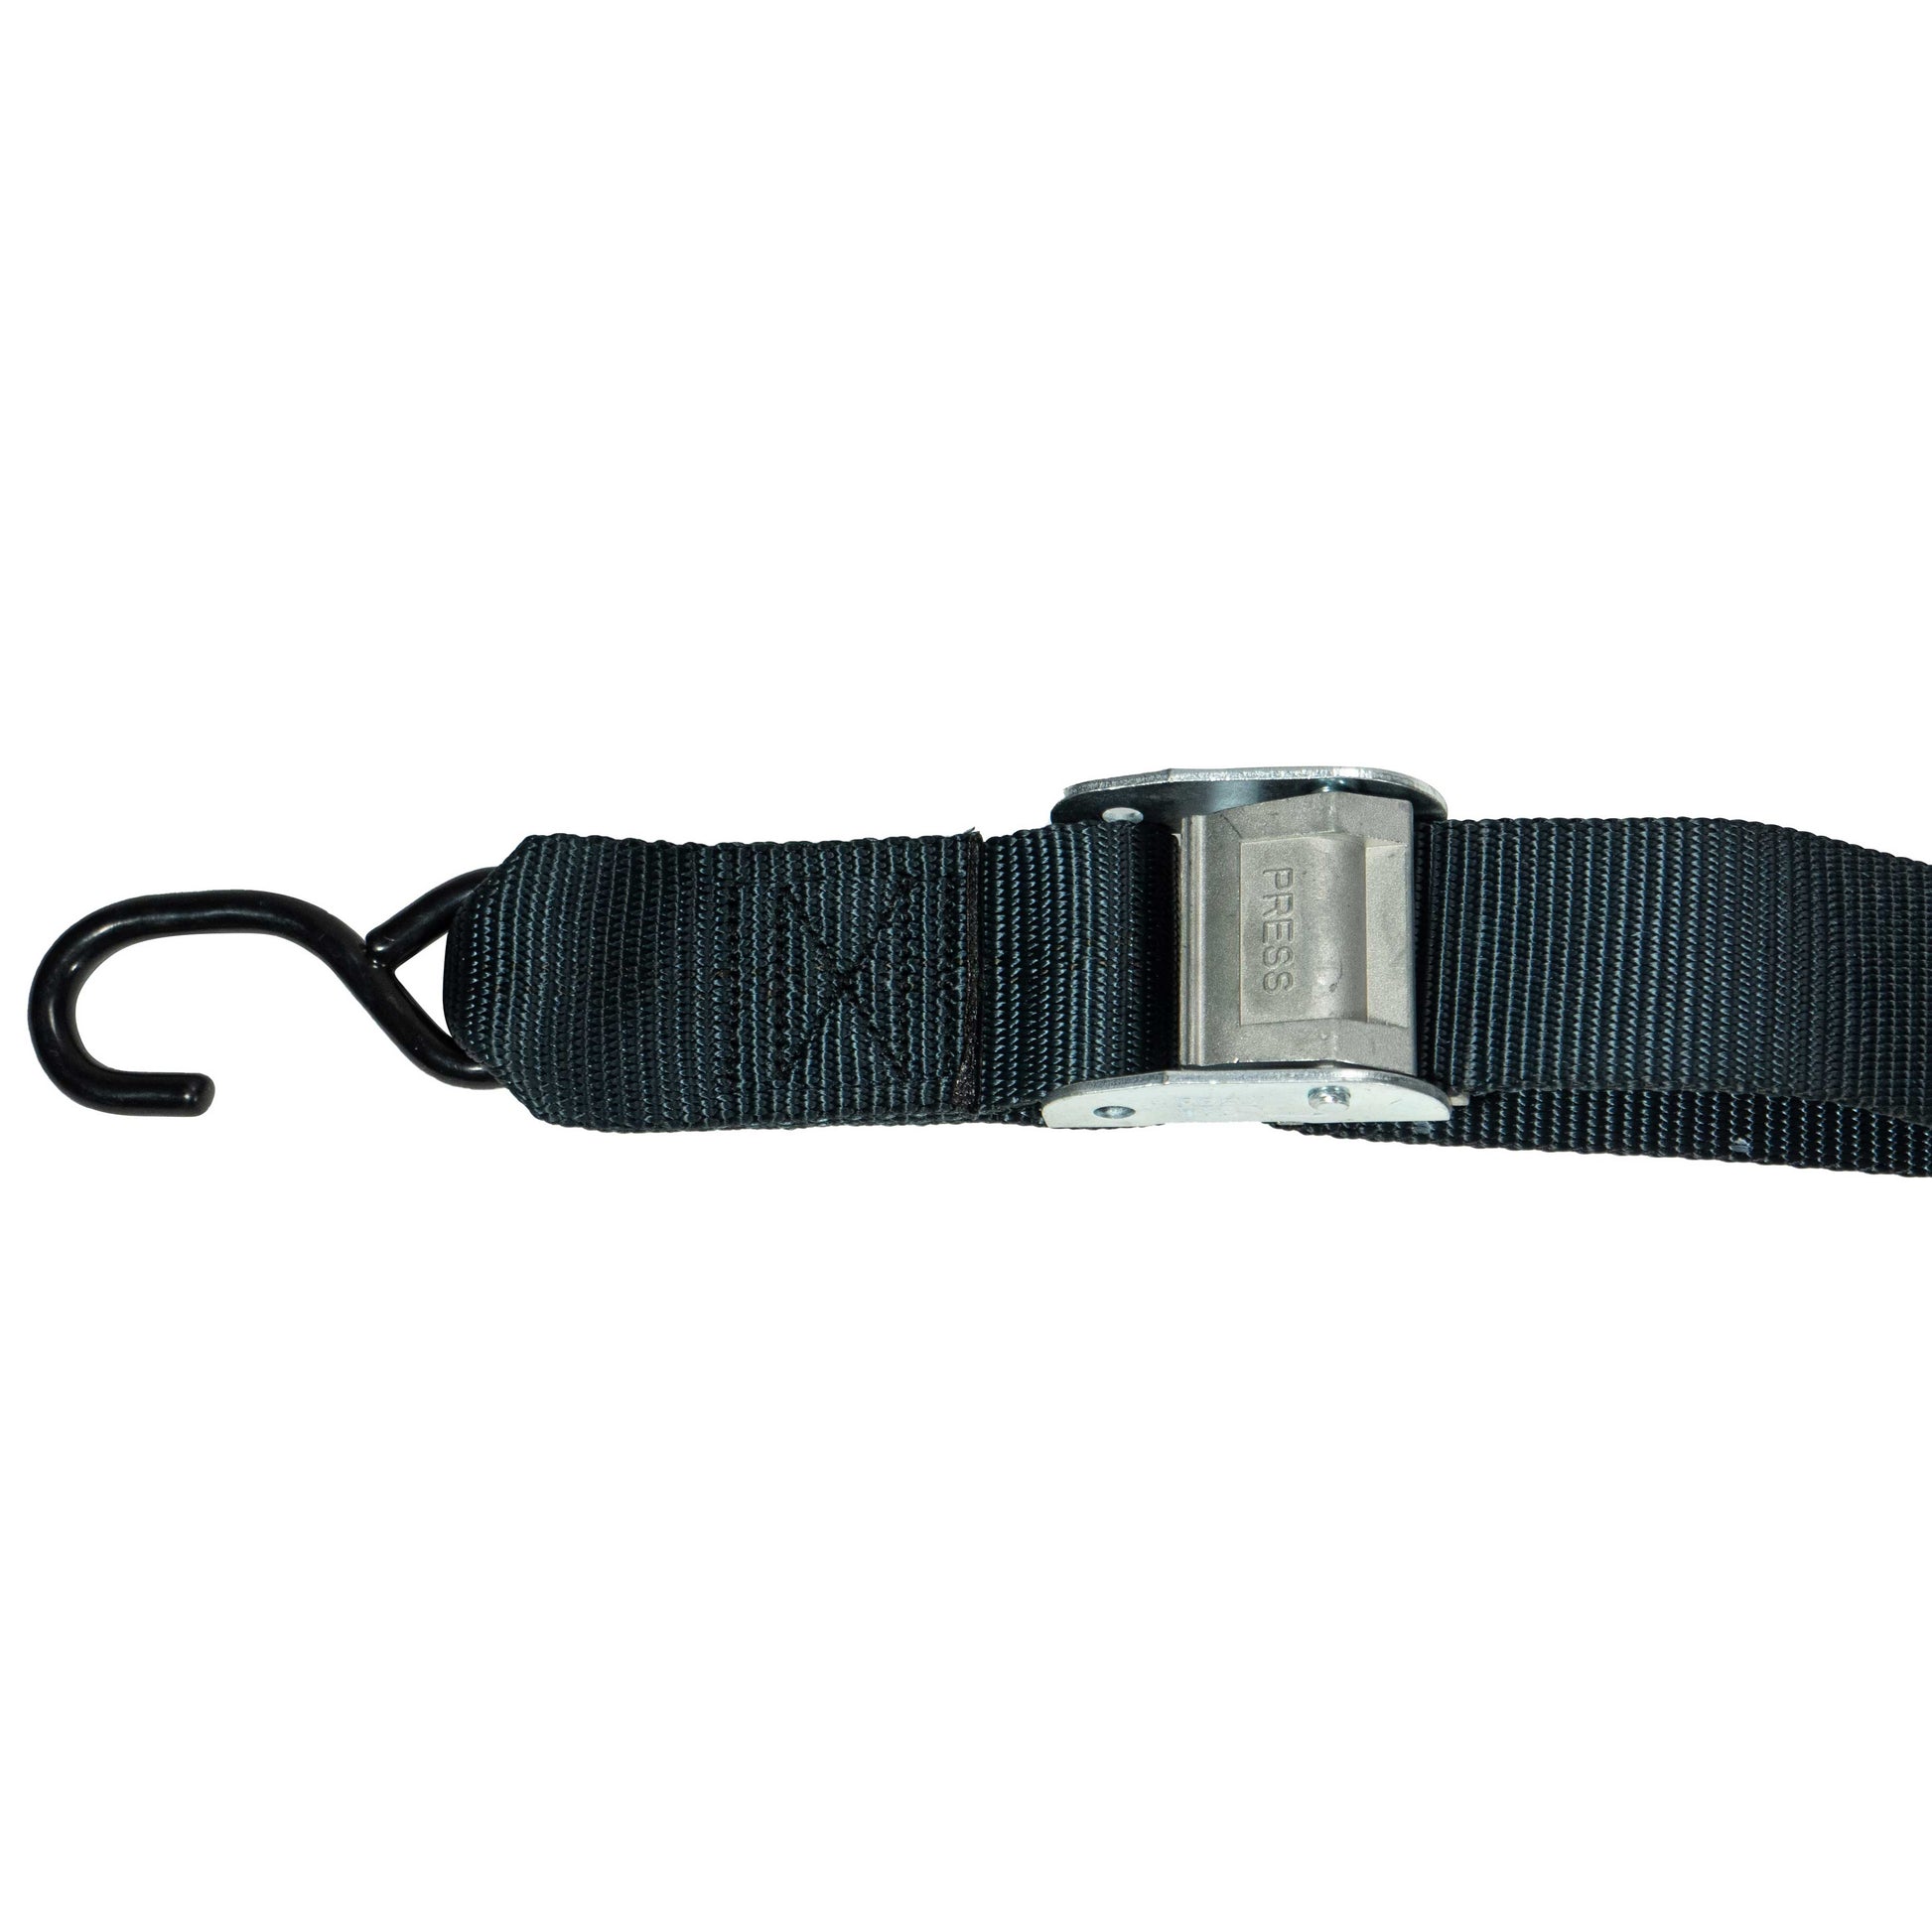 Better Boat Boat Cover Straps Adjustable Buckle Straps 8 Pack Strap Buckles Boat Buckle Nylon Straps with Buckle 1 x 96 Utility Straps with Quick